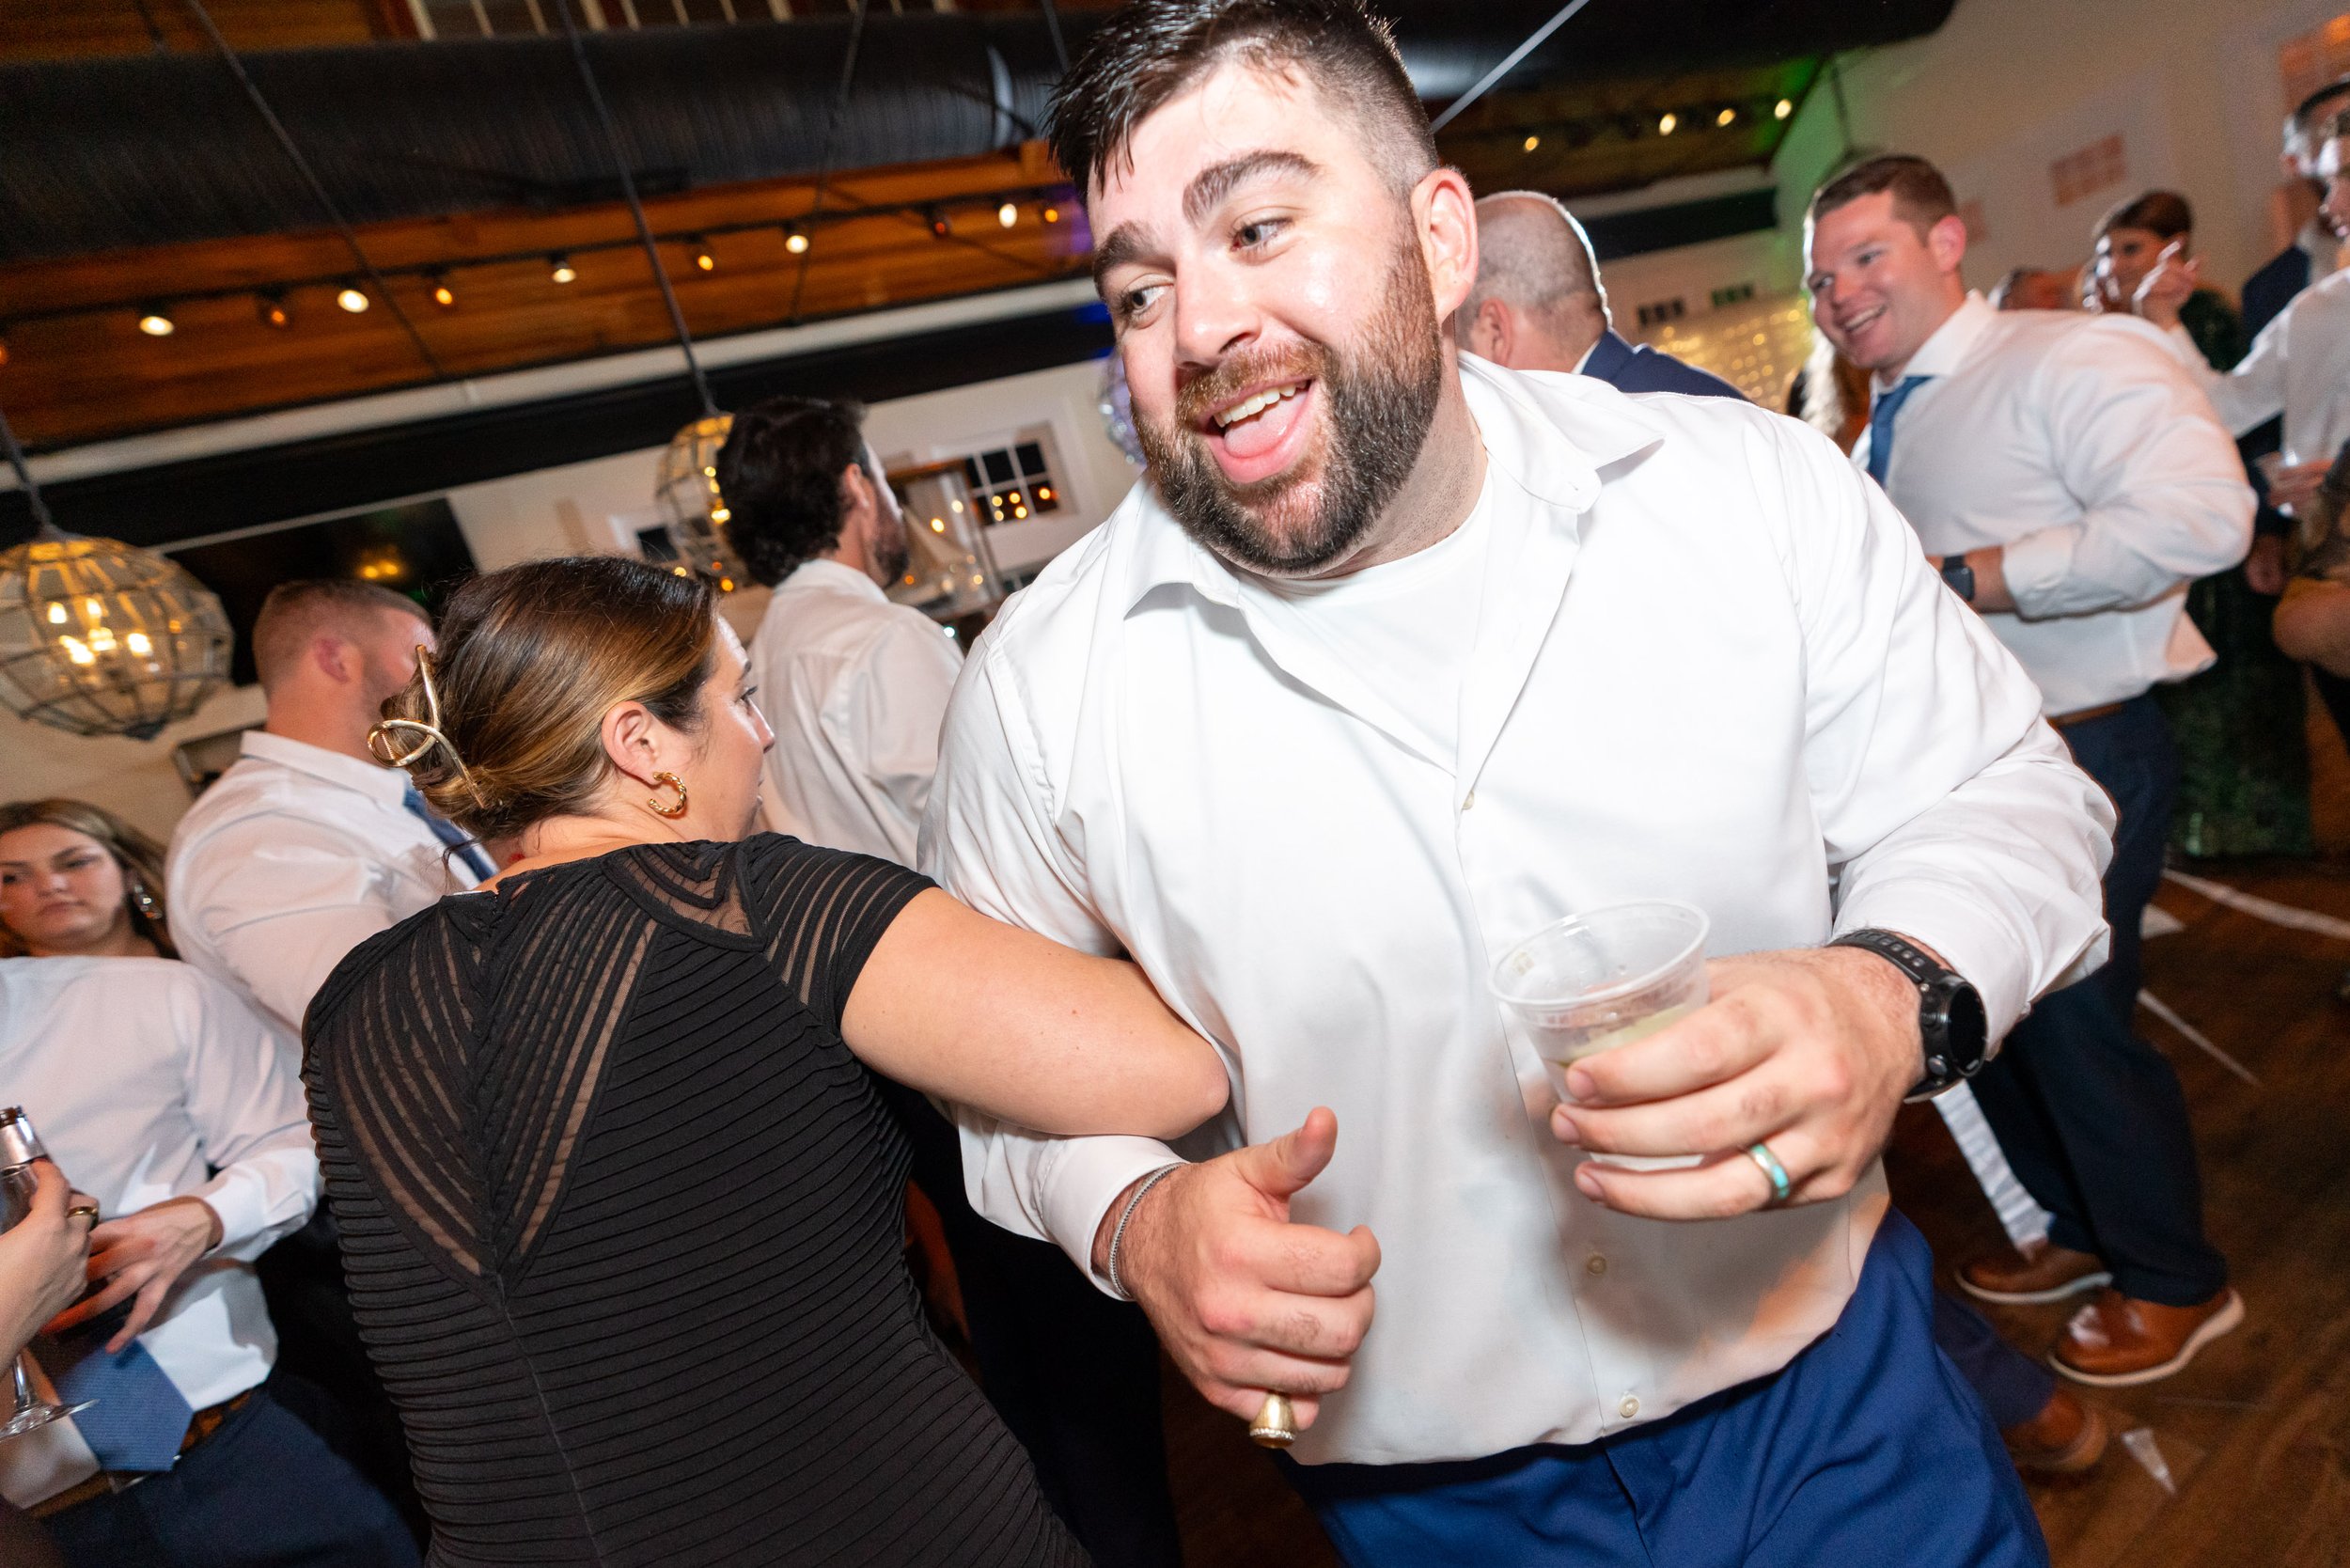 groom dancing with guests during reception at the fun Chesapeake Bay Beach Club venue